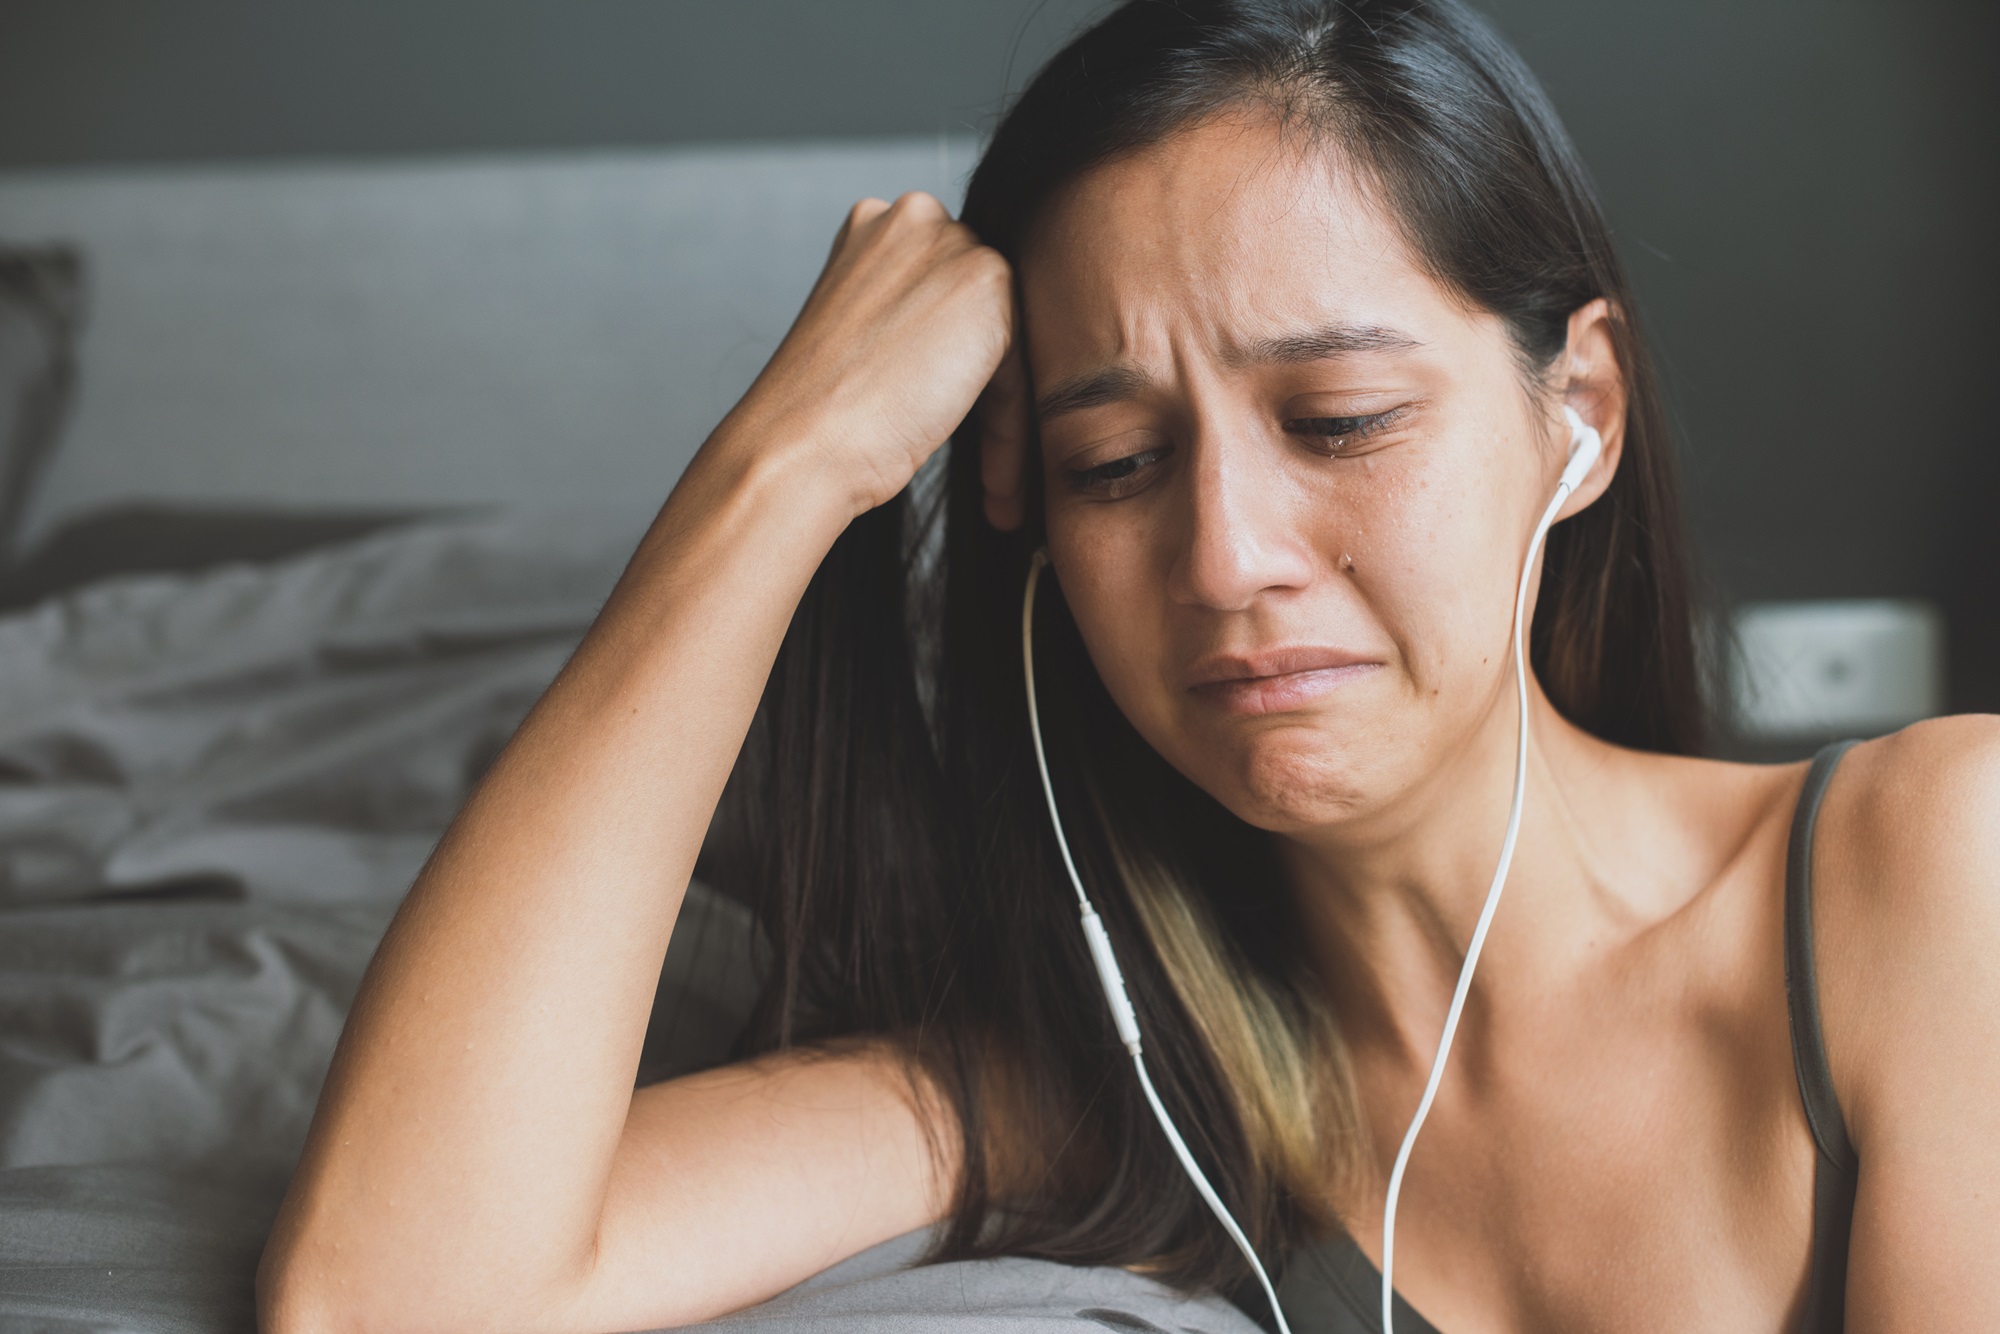 young woman crying while listining emotional songs